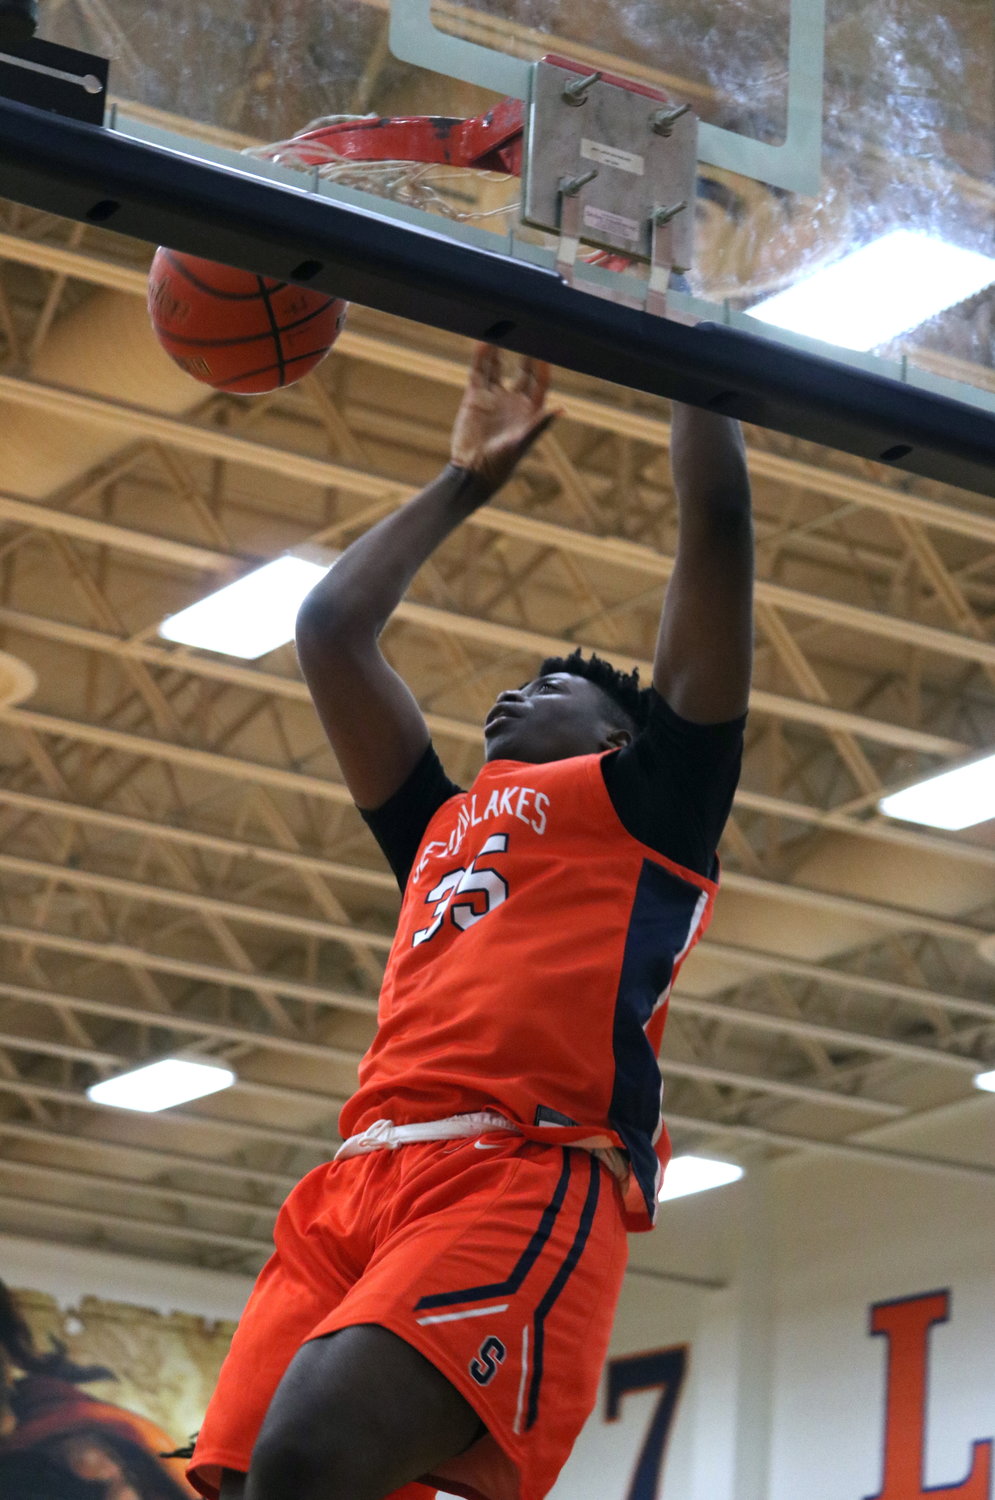 Josh Akpovwa dunks the ball during Monday’s game during Monday’s game between Seven Lakes and Mayde Creek at the Seven Lakes gym.